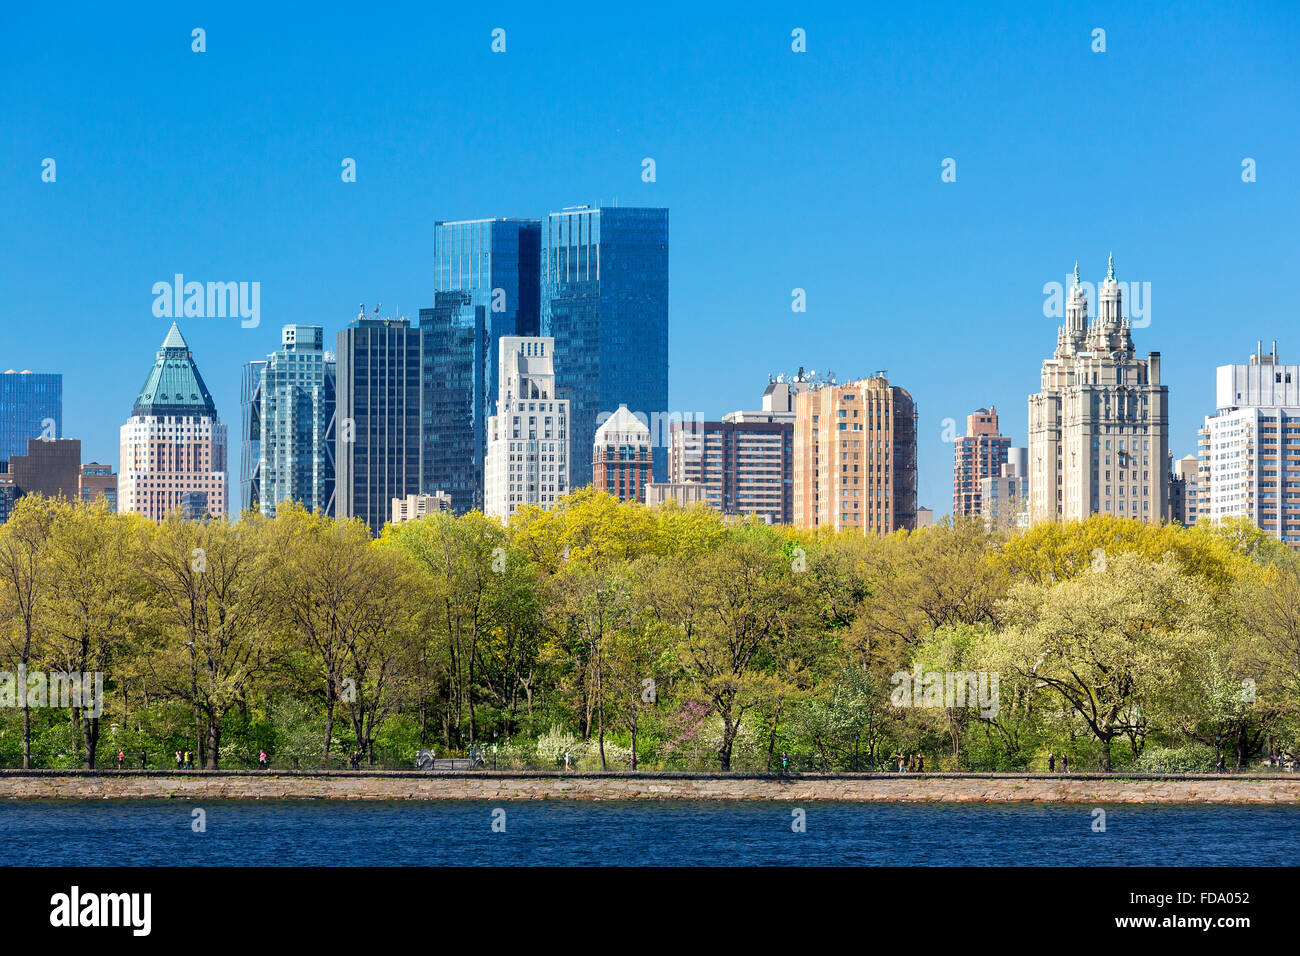 High rise buildings around Central Park Stock Photo